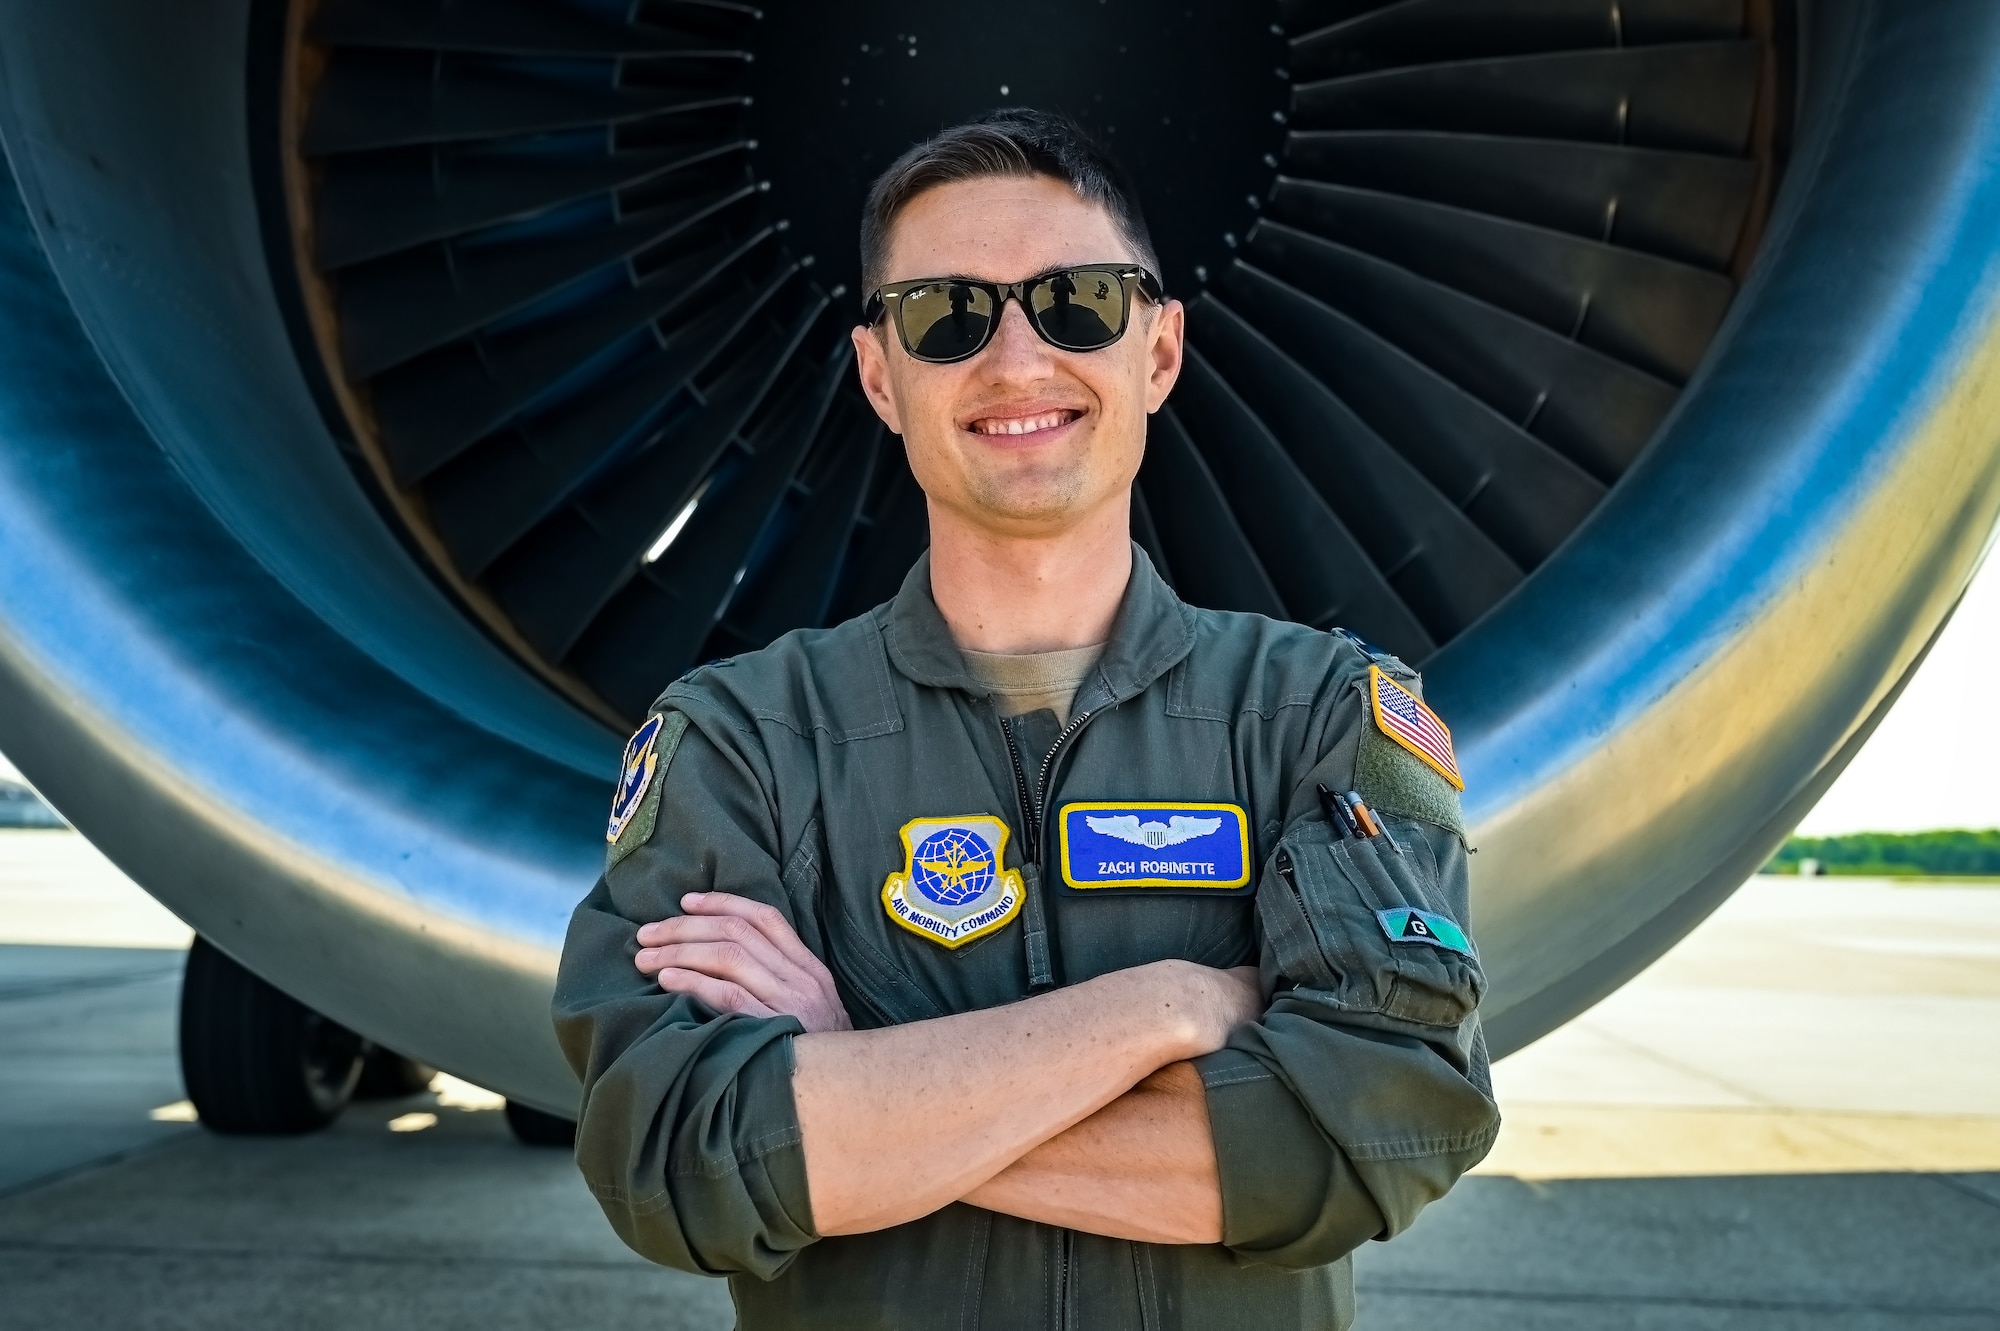 U.S. Air Force Capt. Zach Robinette, 305th Air Mobility Wing pilot, poses for a flight line photo on 11 May, 2023 at Joint Base McGuire-Dix-Lakehurst, N.J. Robinette is a part of the last crew to fly a local KC-10 Extender sortie from the 305th AMW. The 305th AMW extends America's global reach by generating, mobilizing and deploying KC-10 Extenders and C-17 Globemaster III’s to conduct strategic airlift and air refueling missions worldwide. In November 2021, the Wing began transitioning to the new KC-46A Pegasus air refueling aircraft.